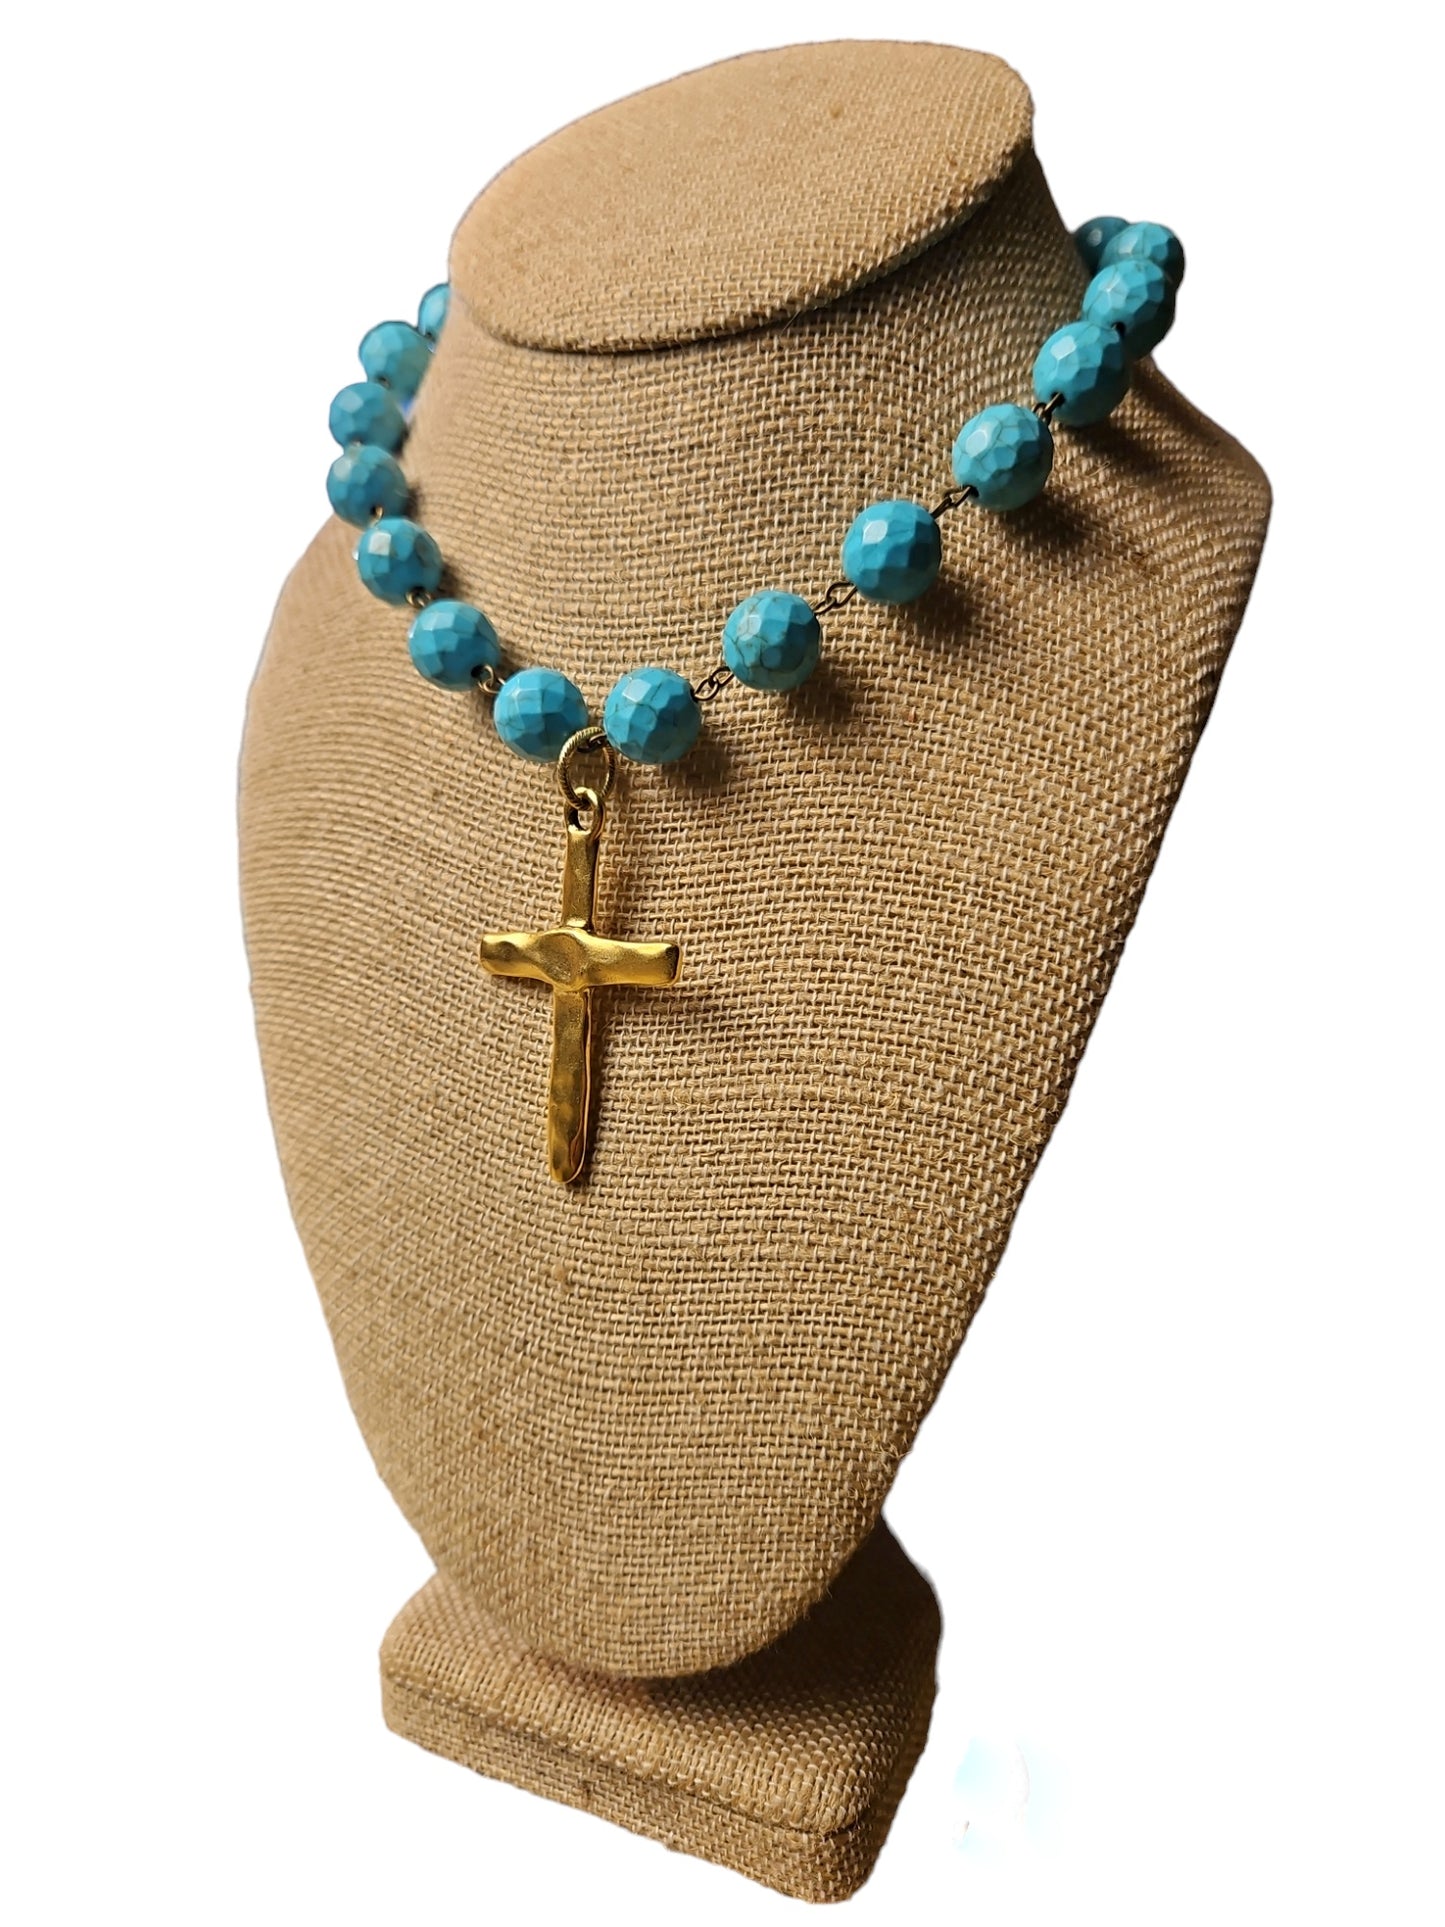 Turquoise cross necklace